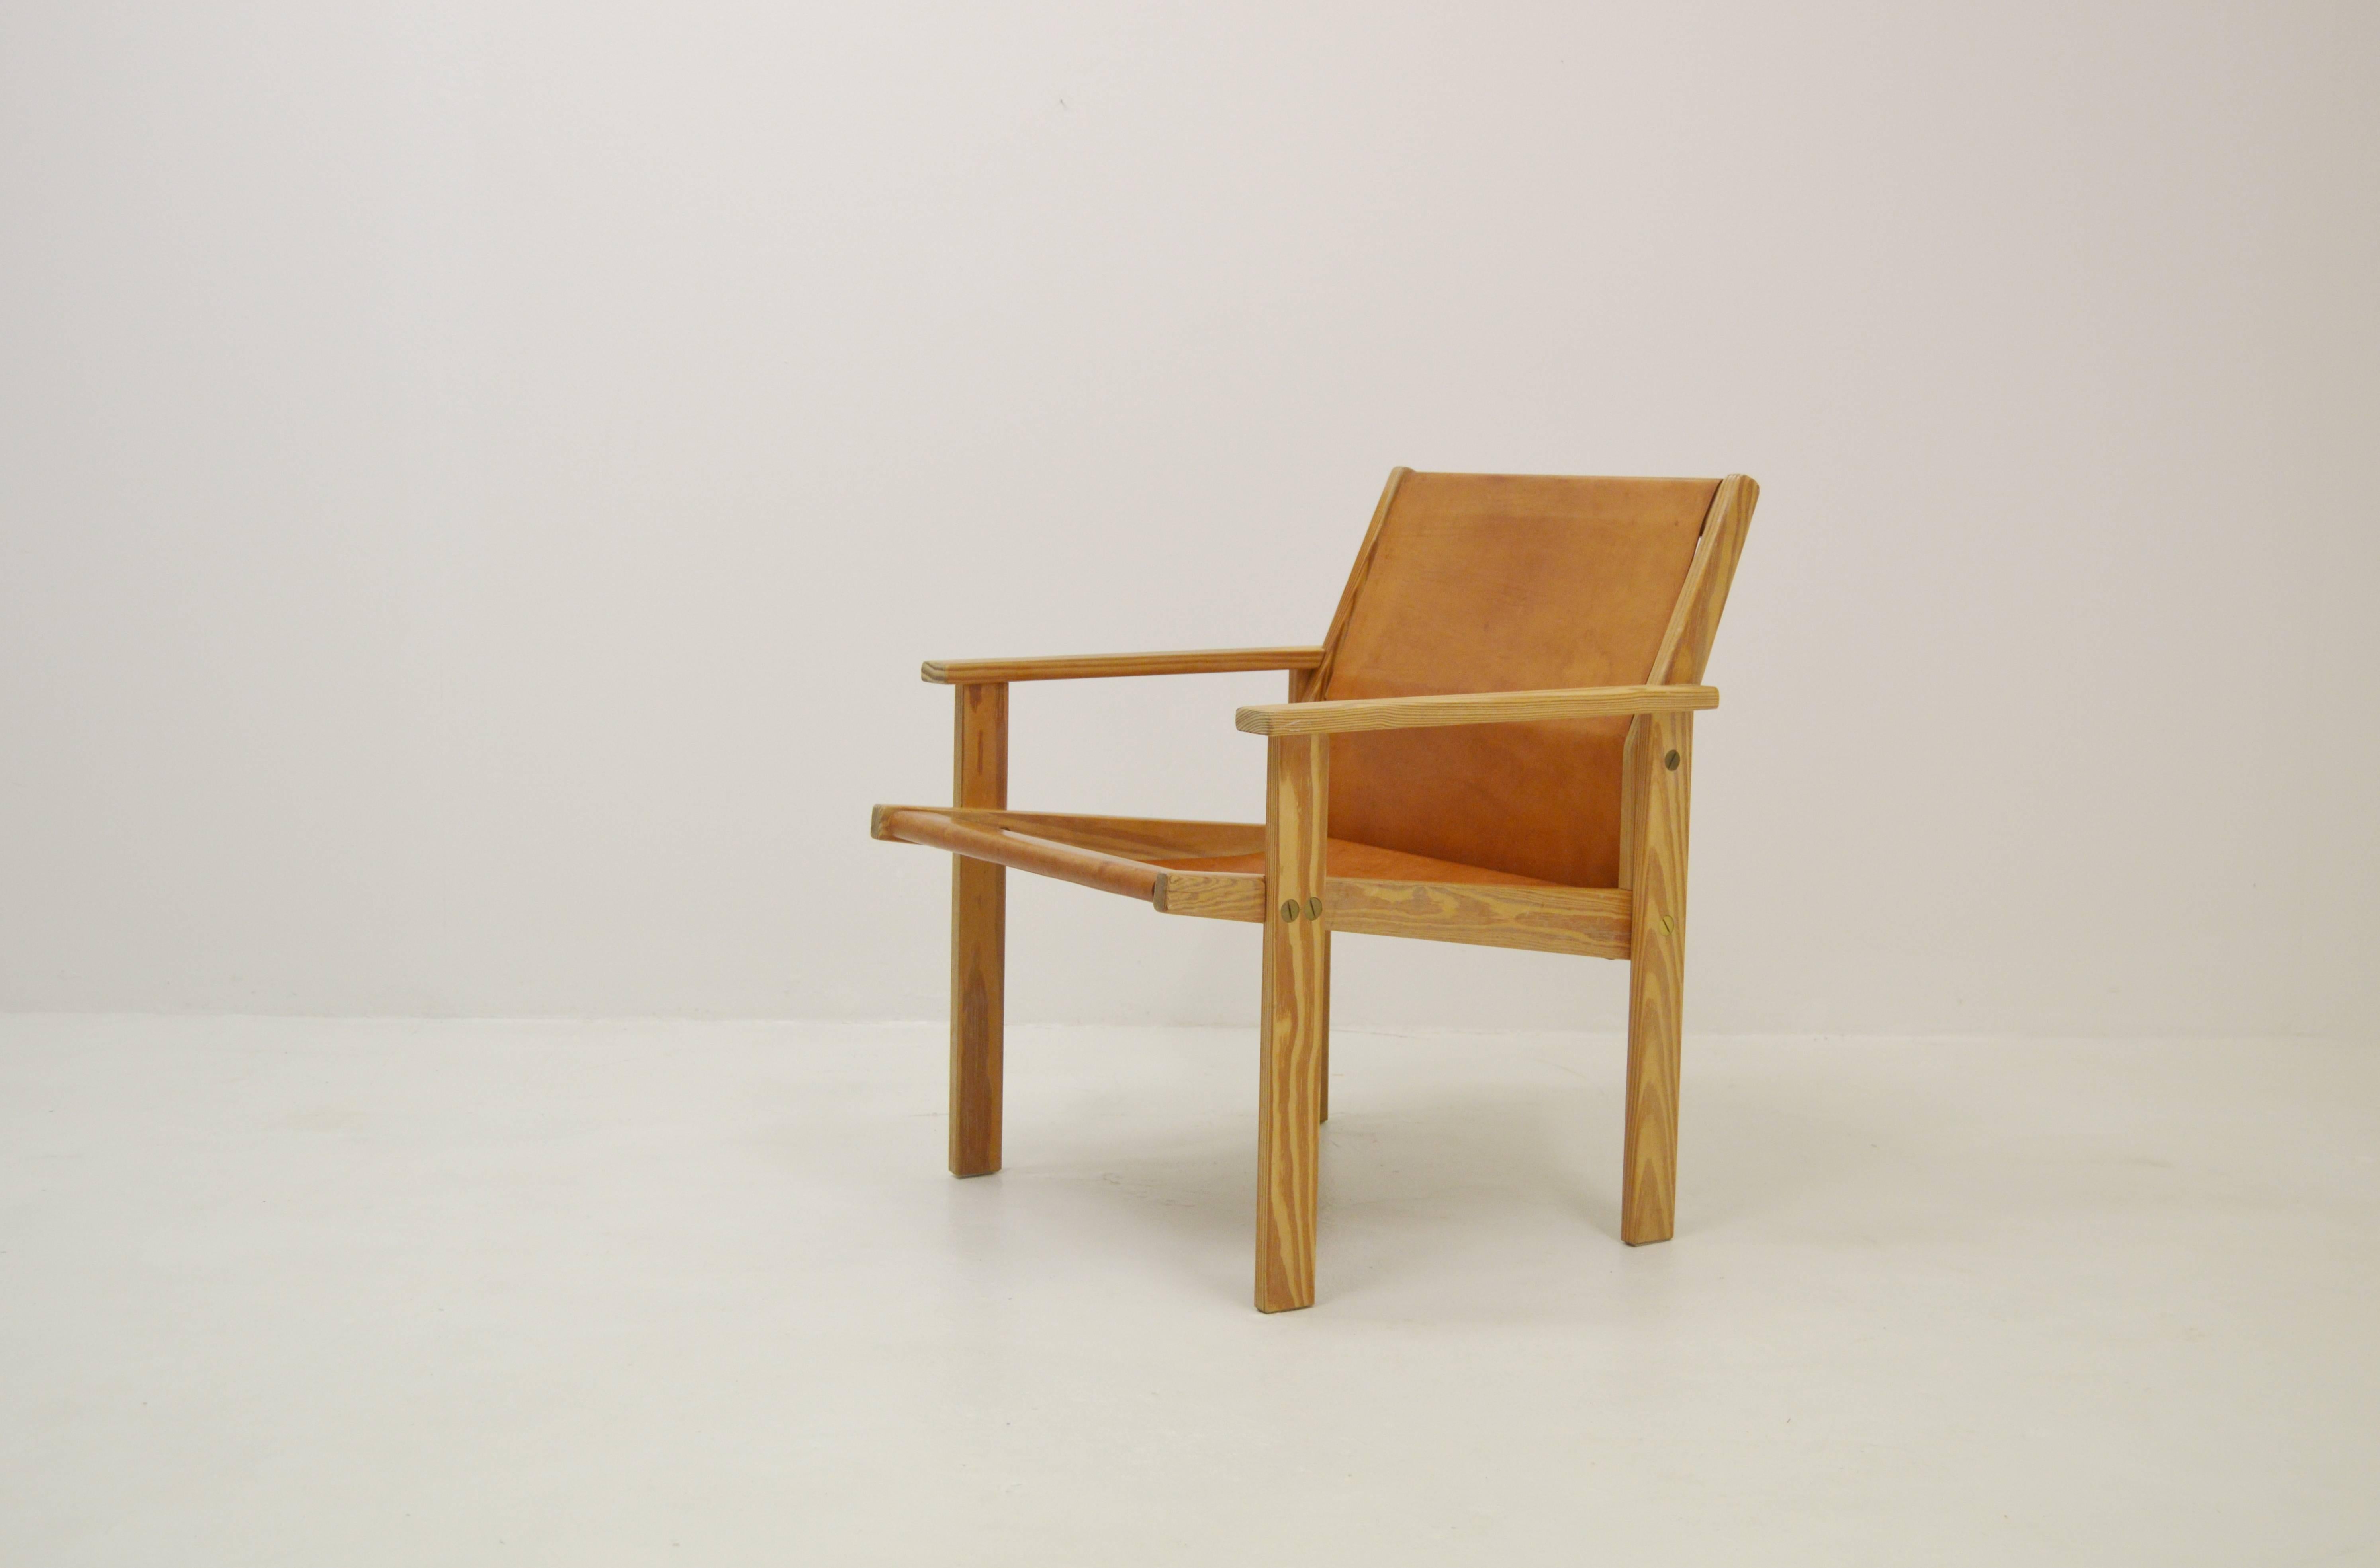 Rare easy chair or armchair by Hans-Agne Jakobsson. Made from solid pine and thick natural leather with brass fittings.
Manufactured by Bertil Johansson furniture maker in Markaryd, Sweden.
Age related wear and signs of usage and patina.